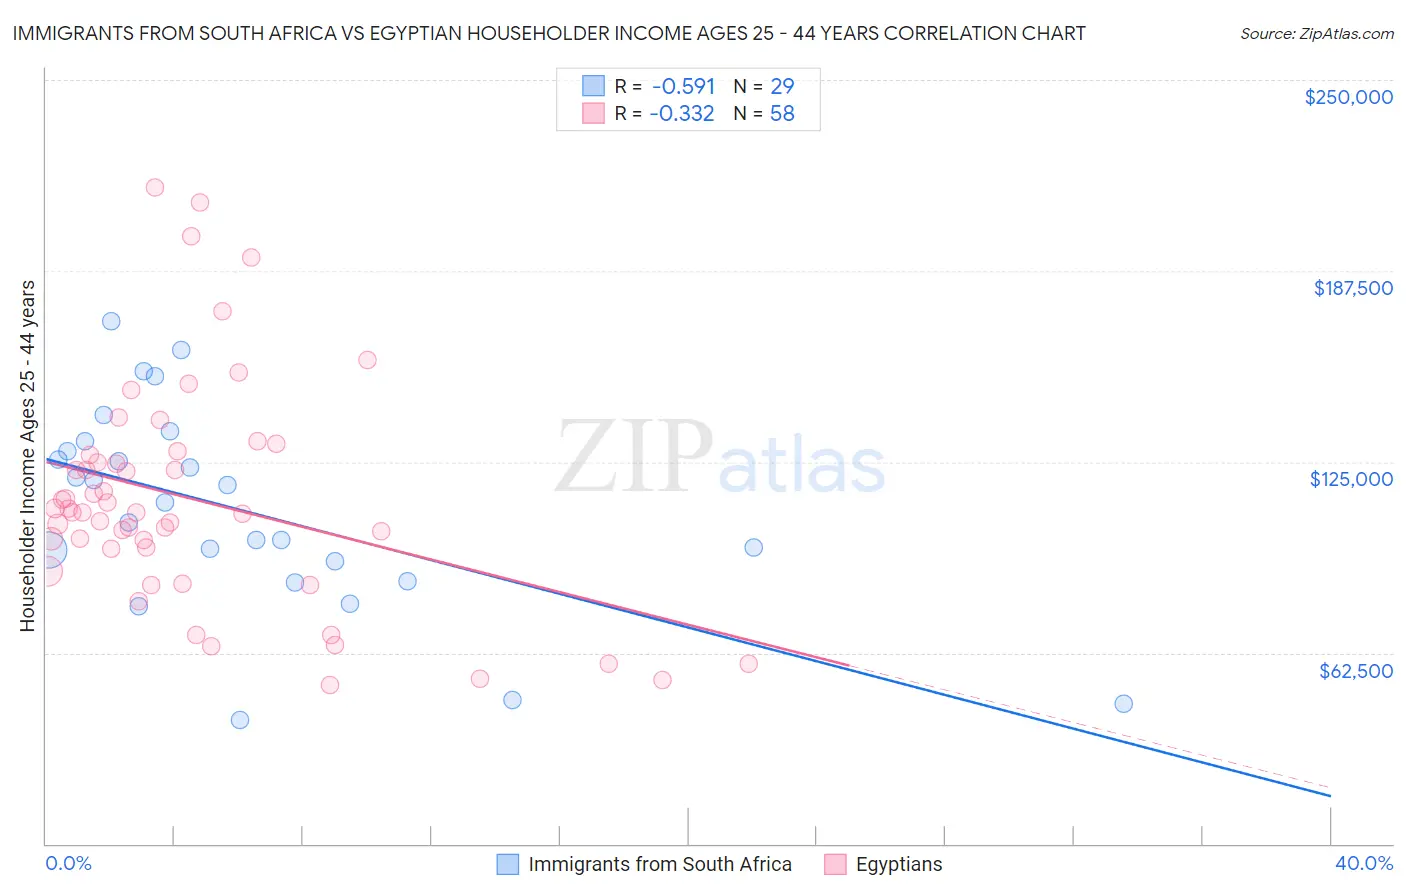 Immigrants from South Africa vs Egyptian Householder Income Ages 25 - 44 years